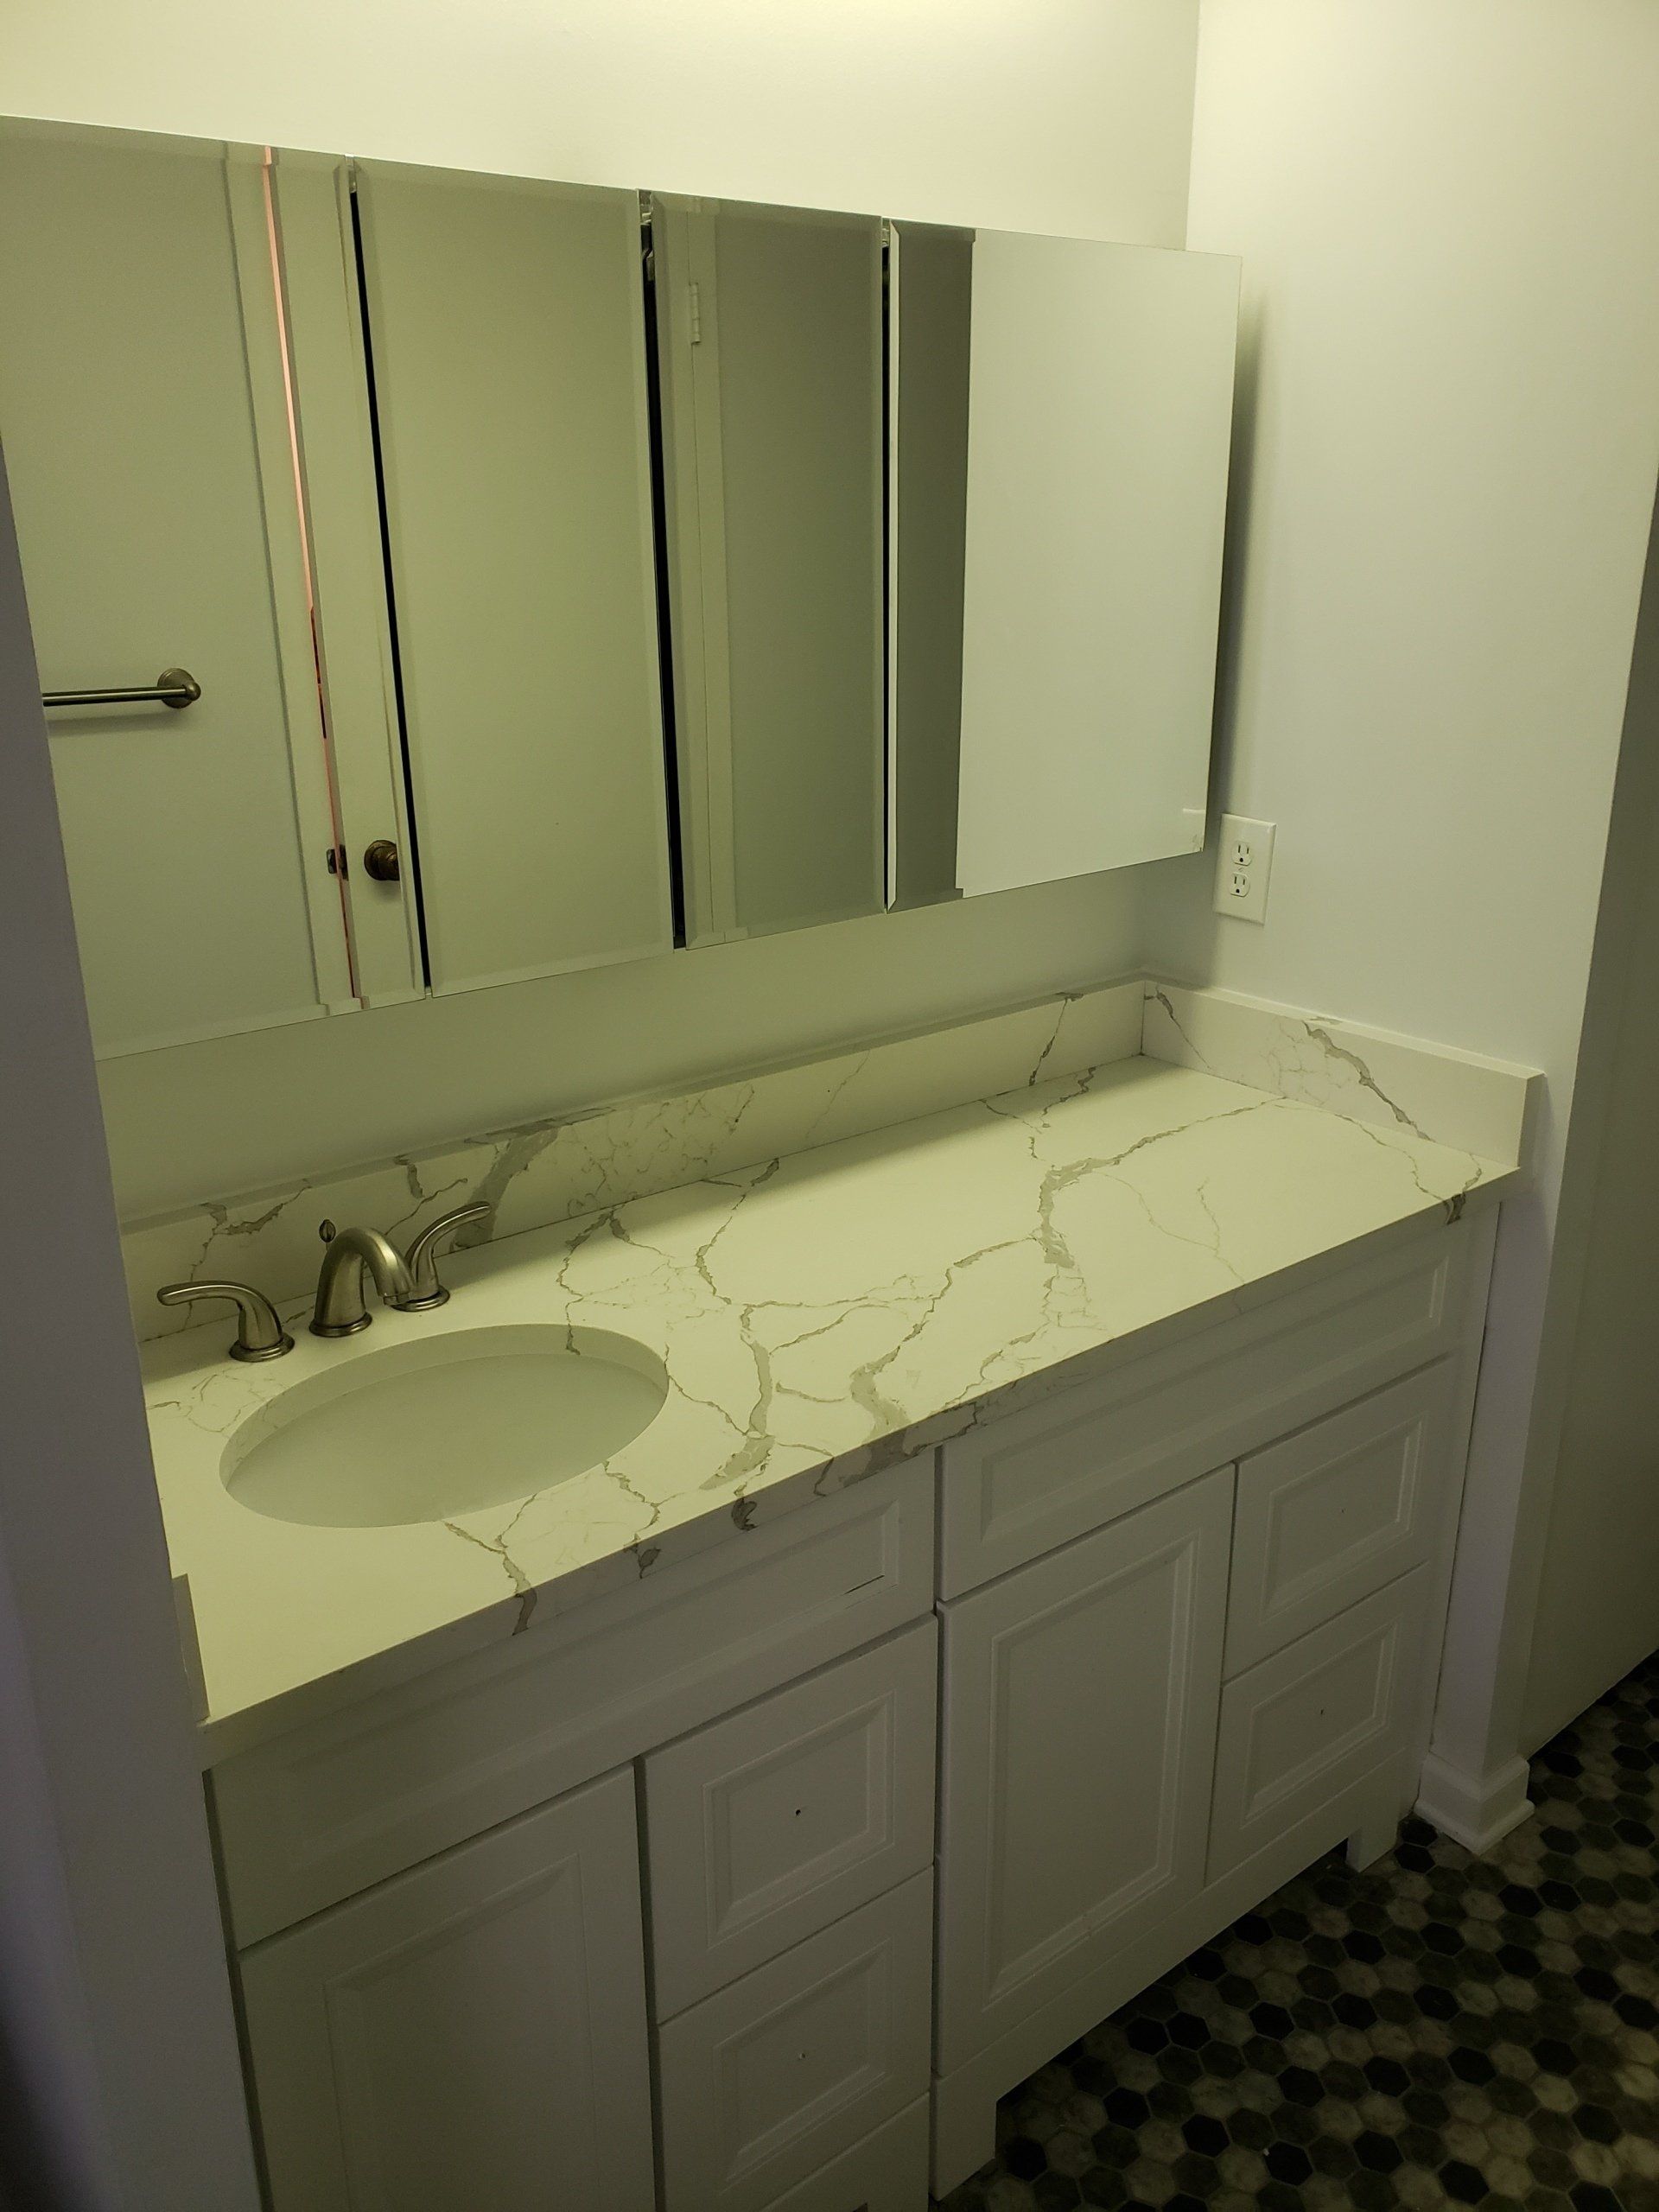 Jenkintown condo bathroom remodel close up of marble counter top, vanity and mirrors.